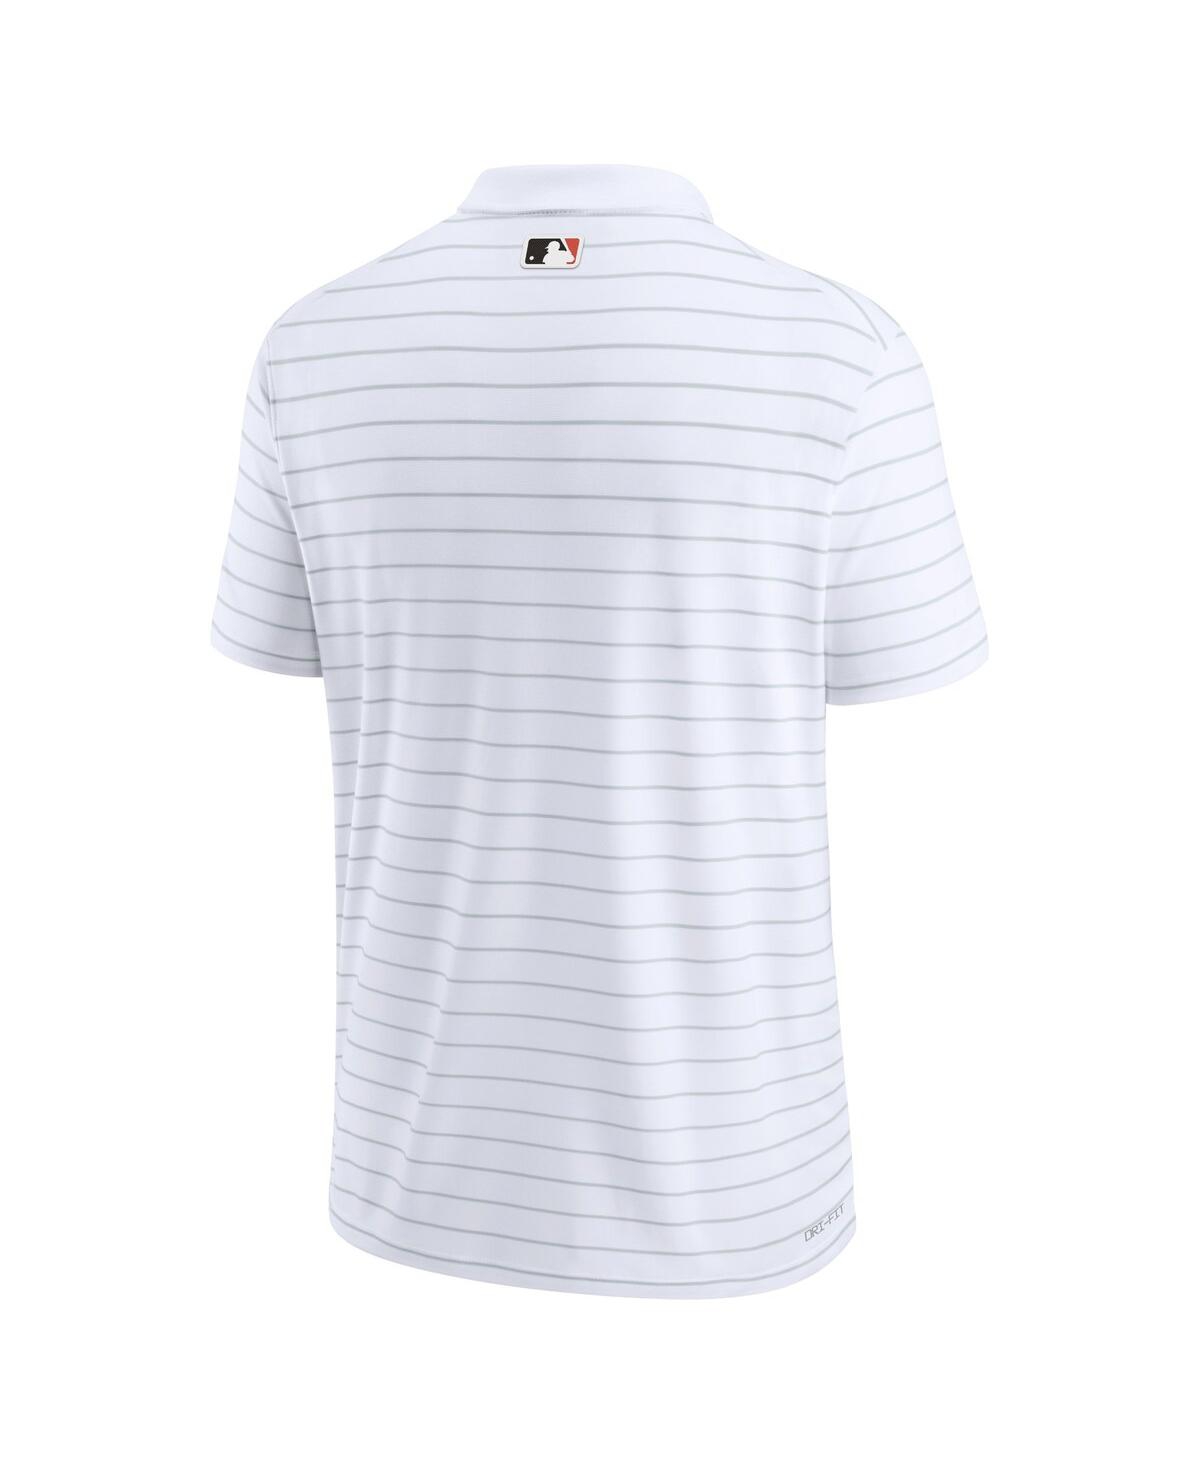 Shop Nike Men's  White San Francisco Giants Authentic Collection Victory Striped Performance Polo Shirt